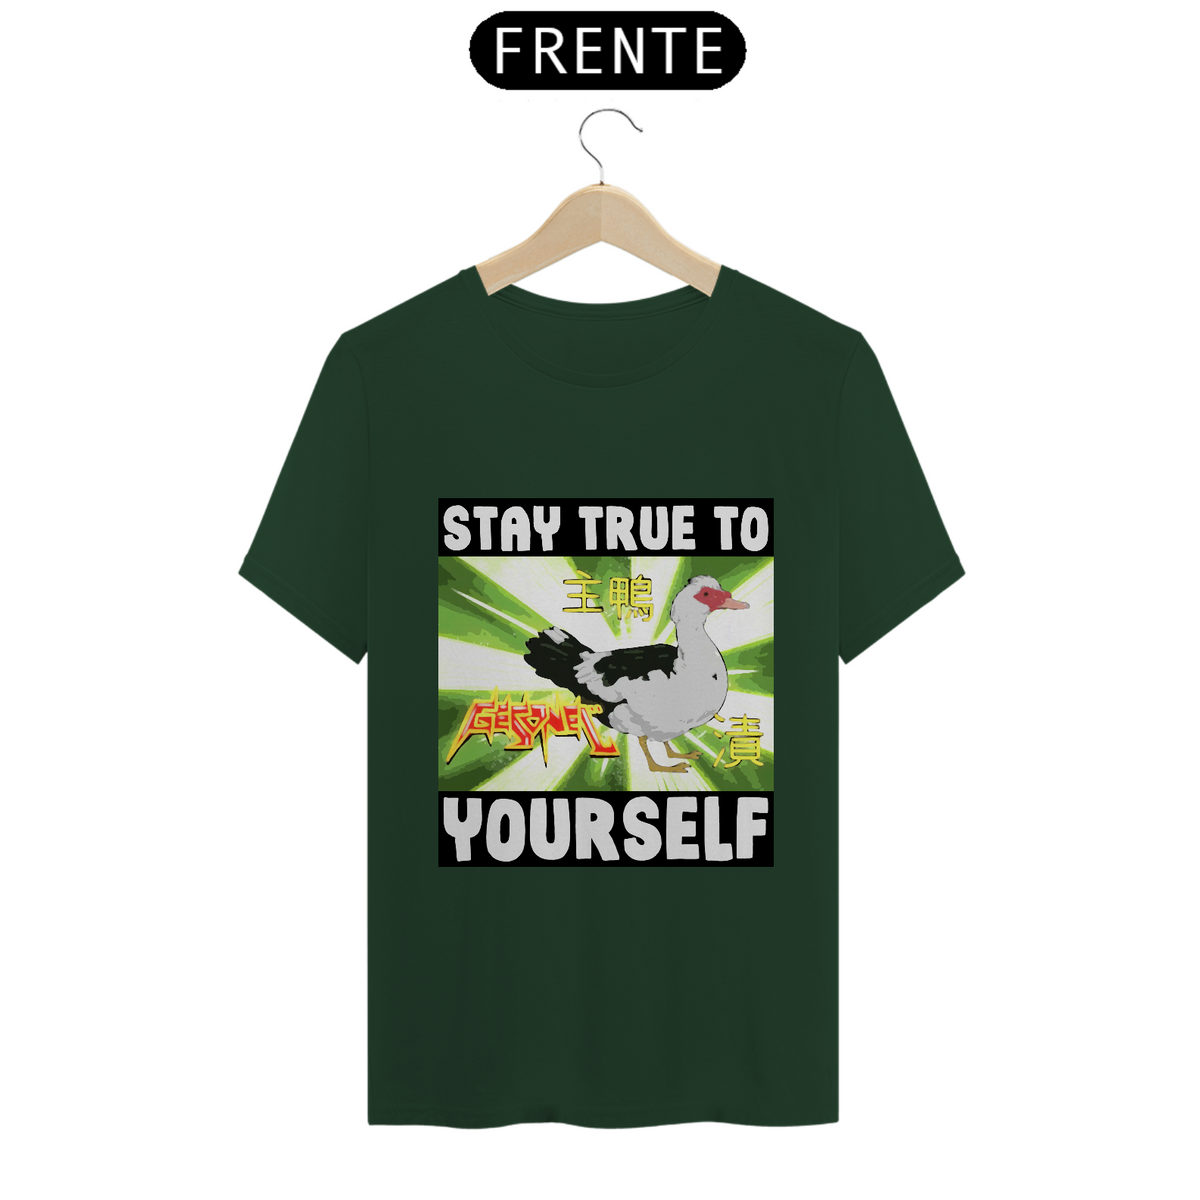 Nome do produto: Stay True To Yourself (Gesonel) - T-Shirt